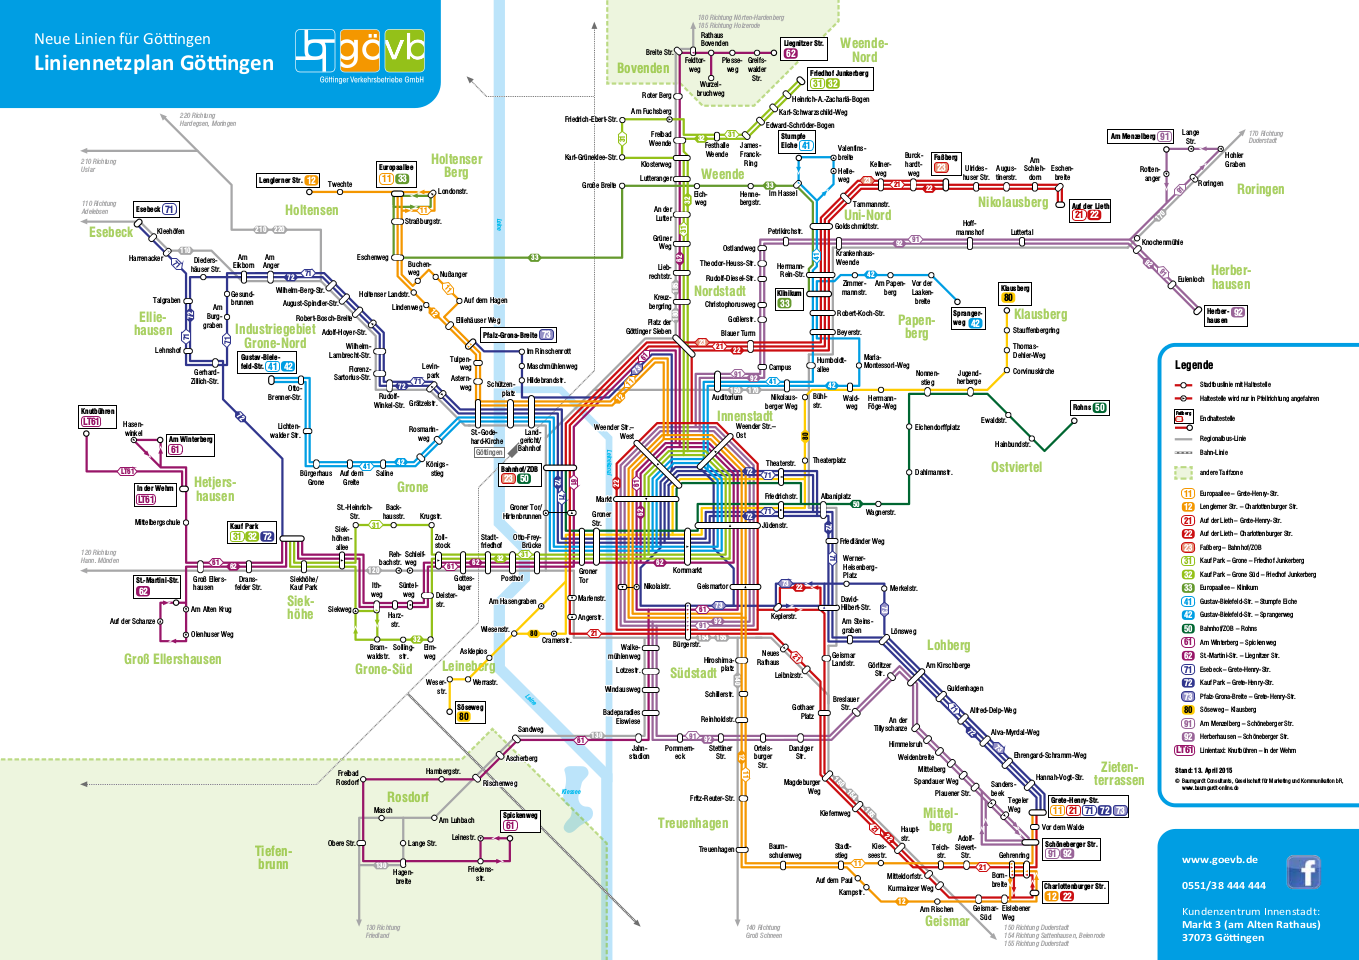 Click to see the map of public transportation